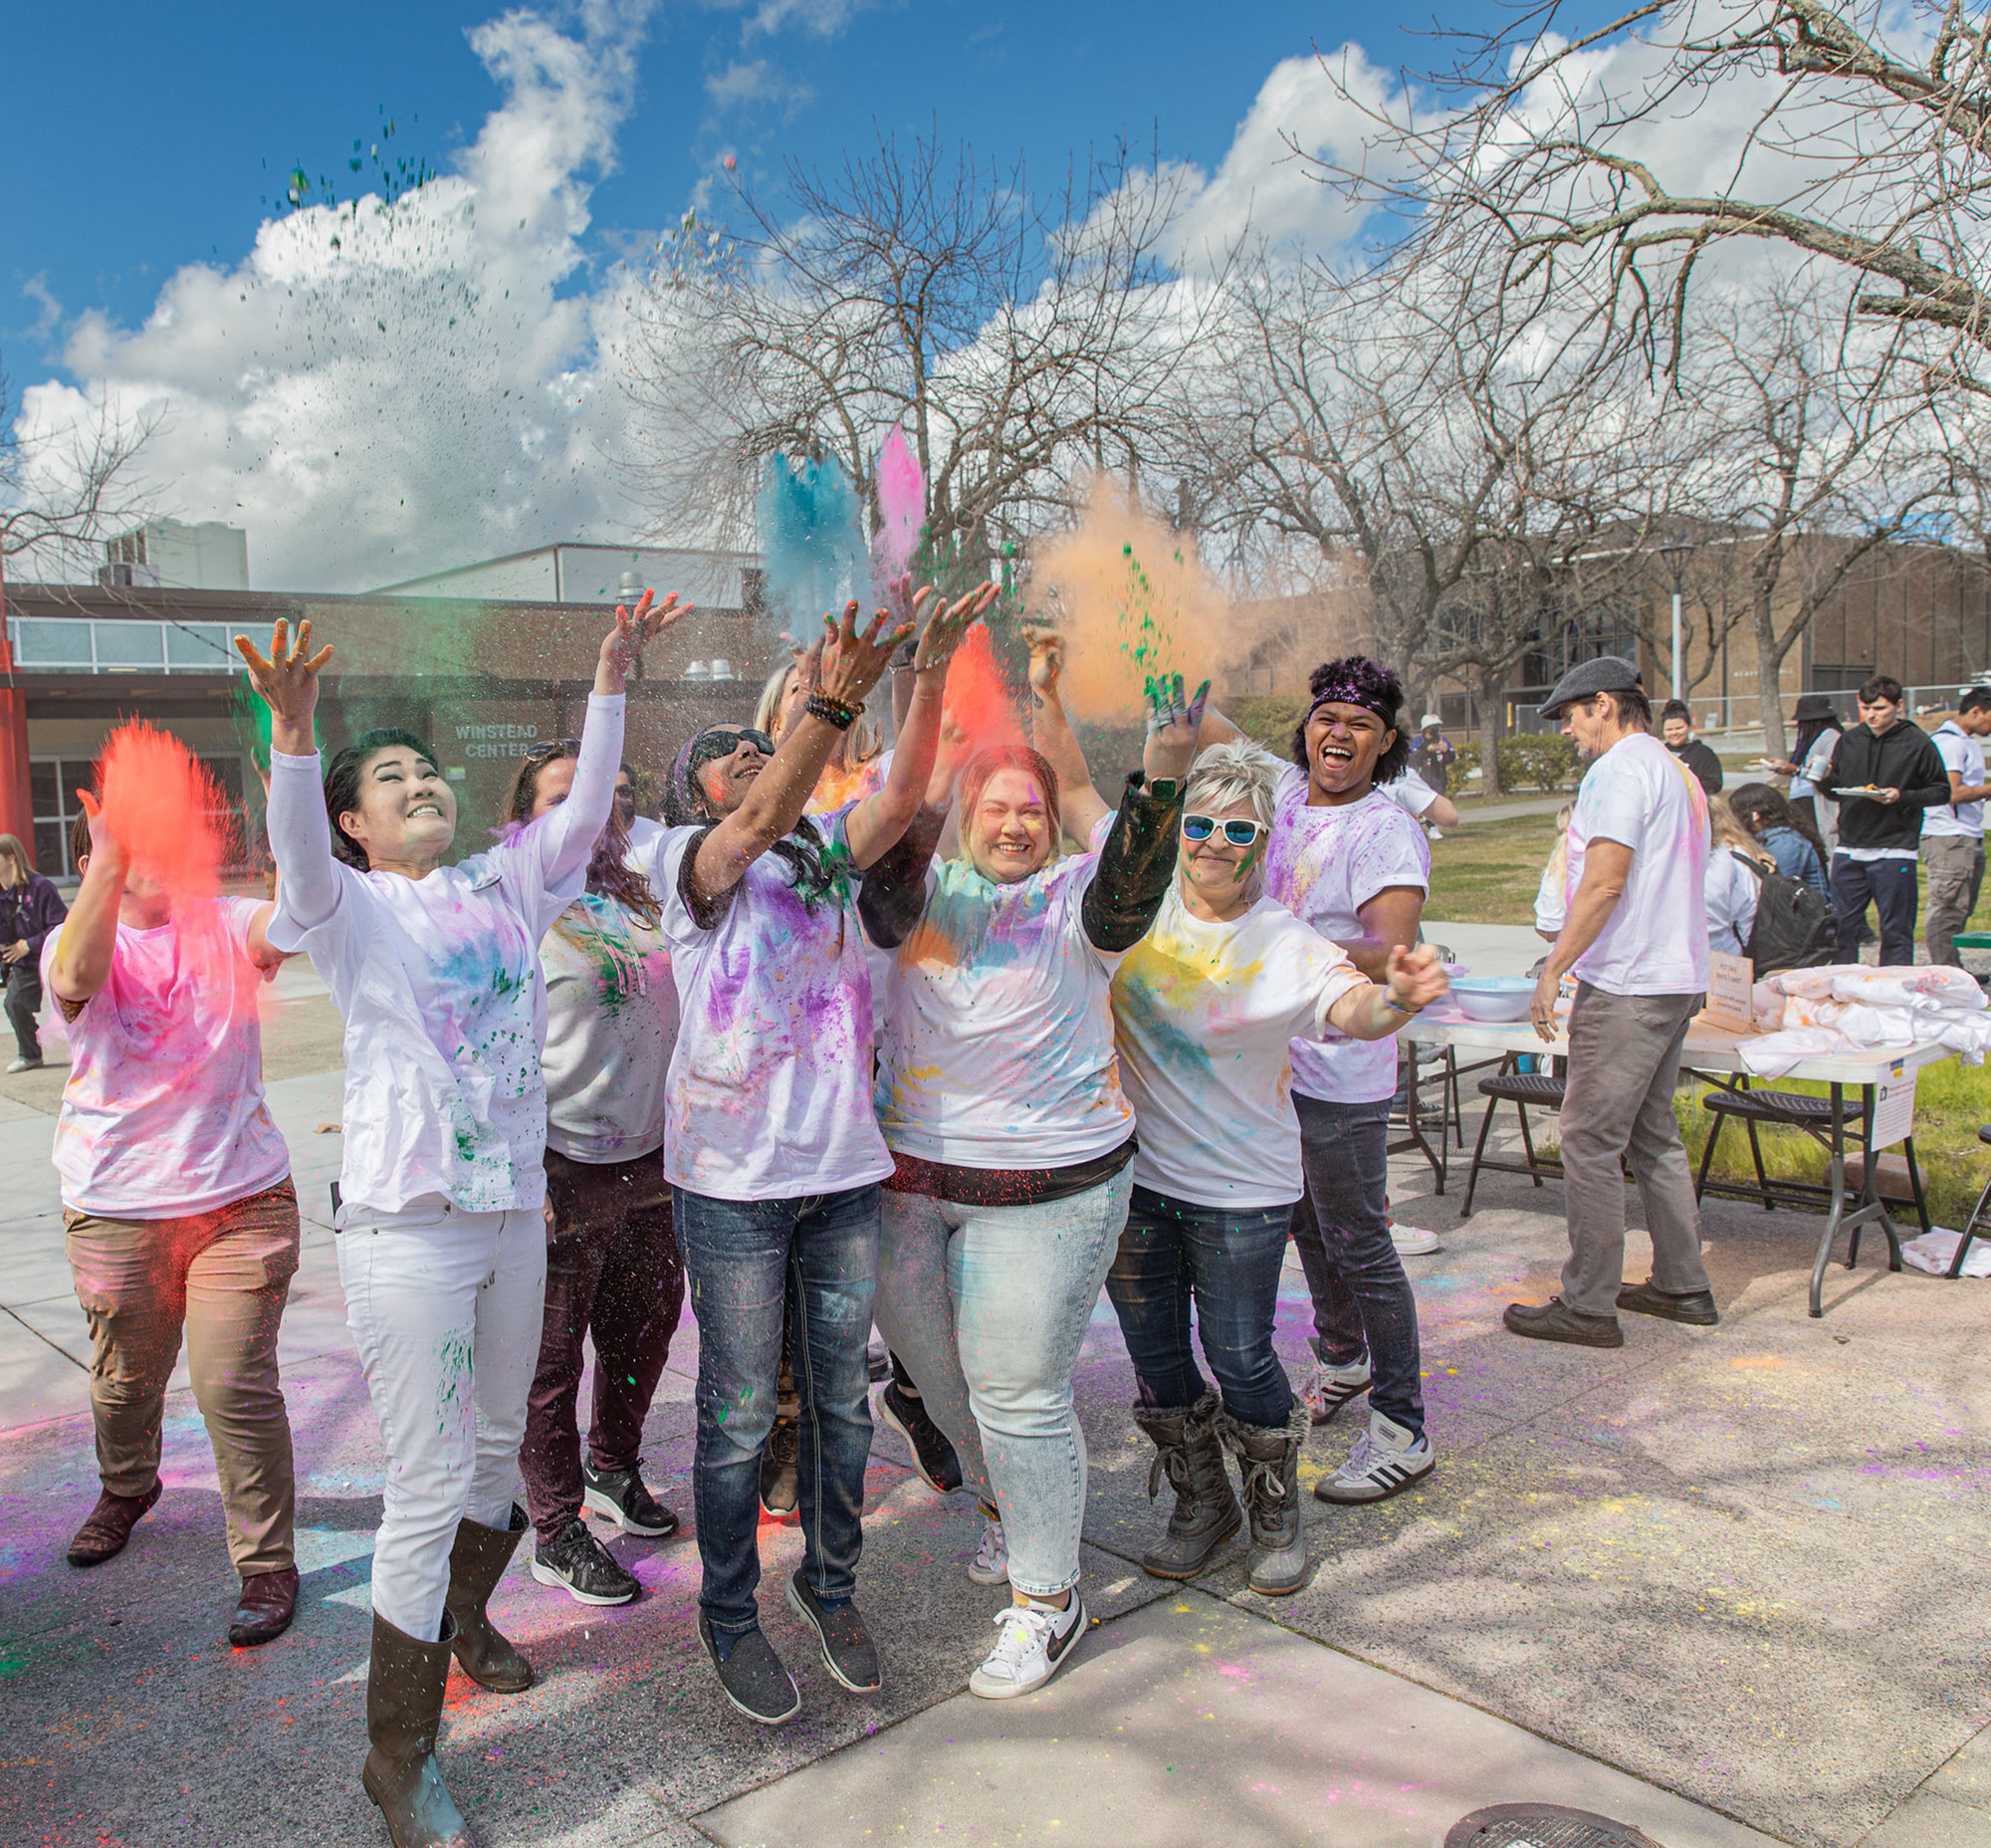 Students celebrate HOLI festival by throwing colored powder in Rocklin quad